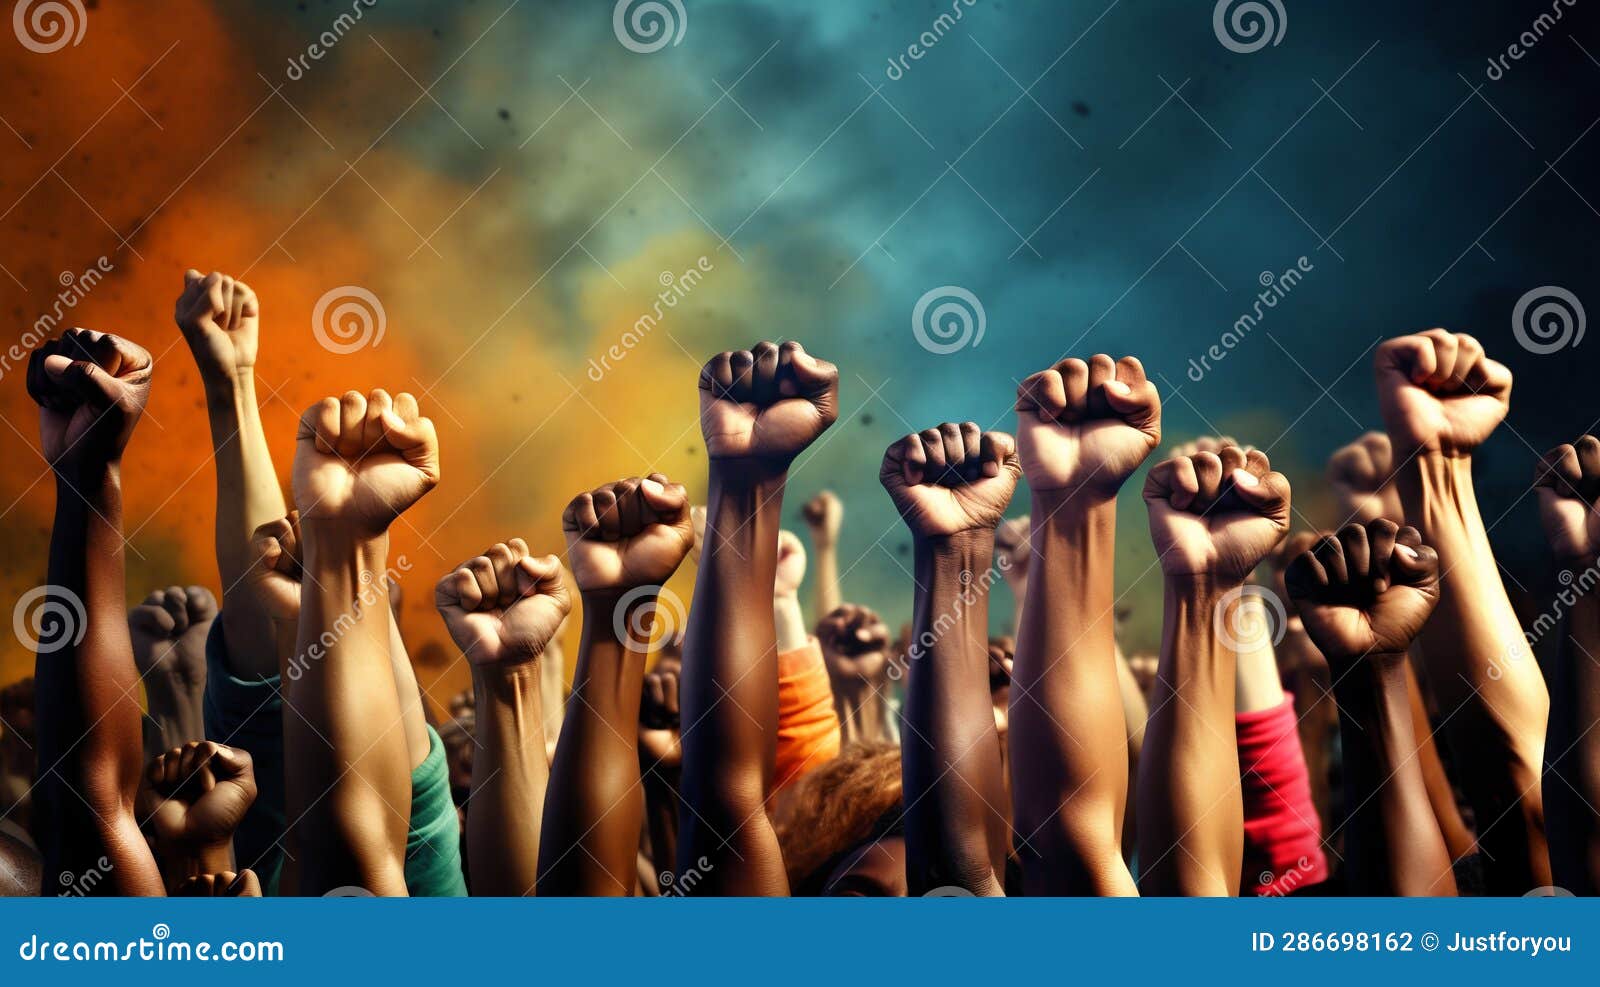 People S Hands Raised with Clenched Fists. Human Rights, Feminism ...